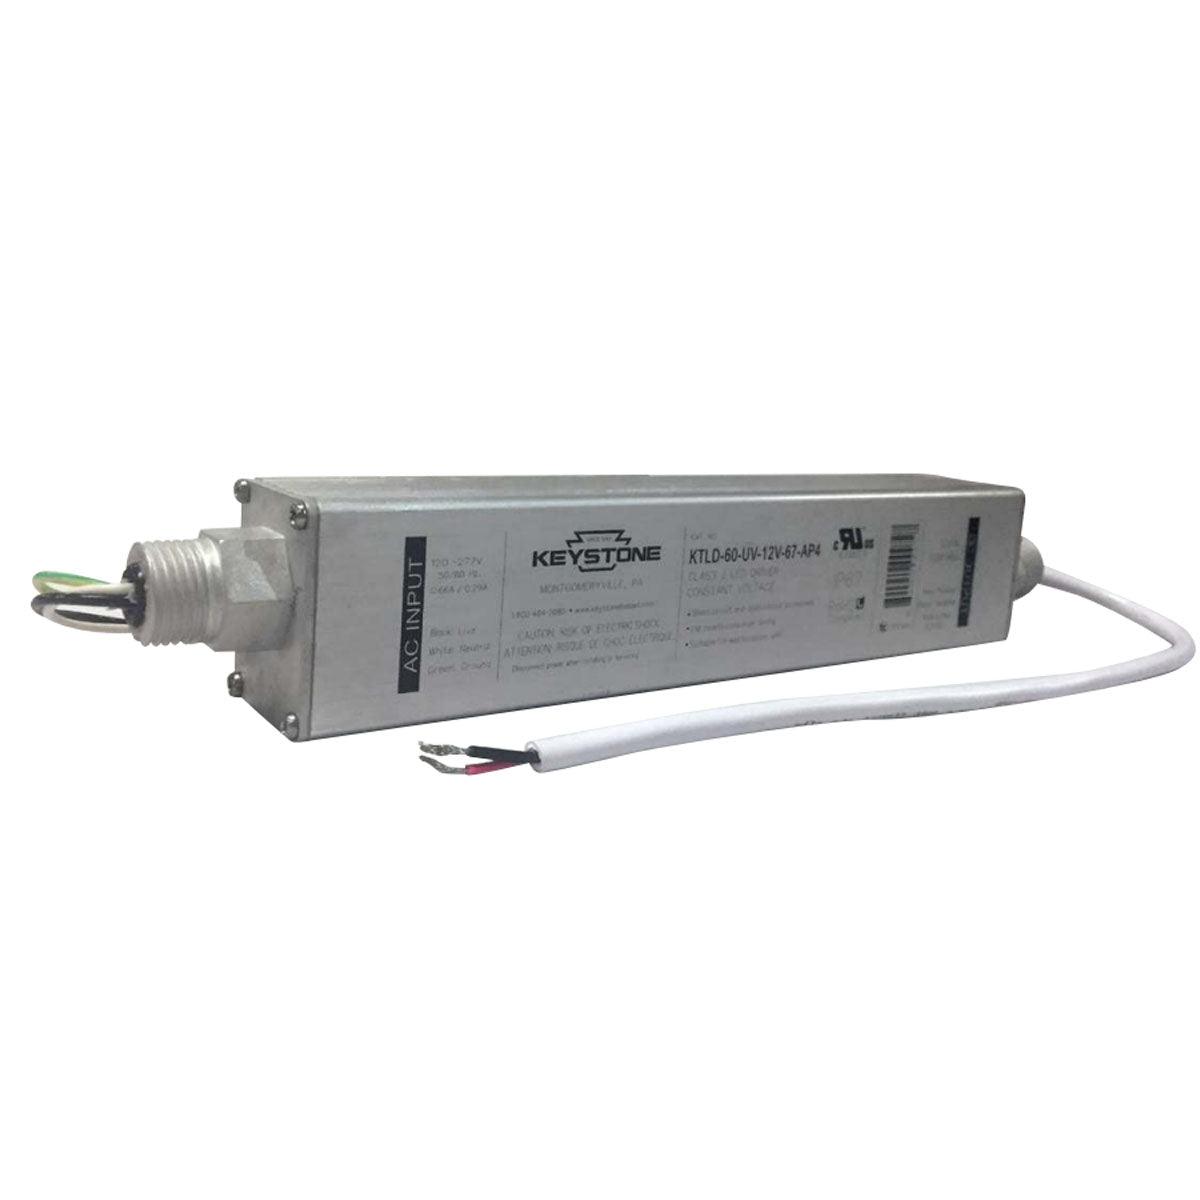 60 Watts, 12VDC Class 2 Constant Voltage LED Diver, 120-277V Input, IP67 Rated